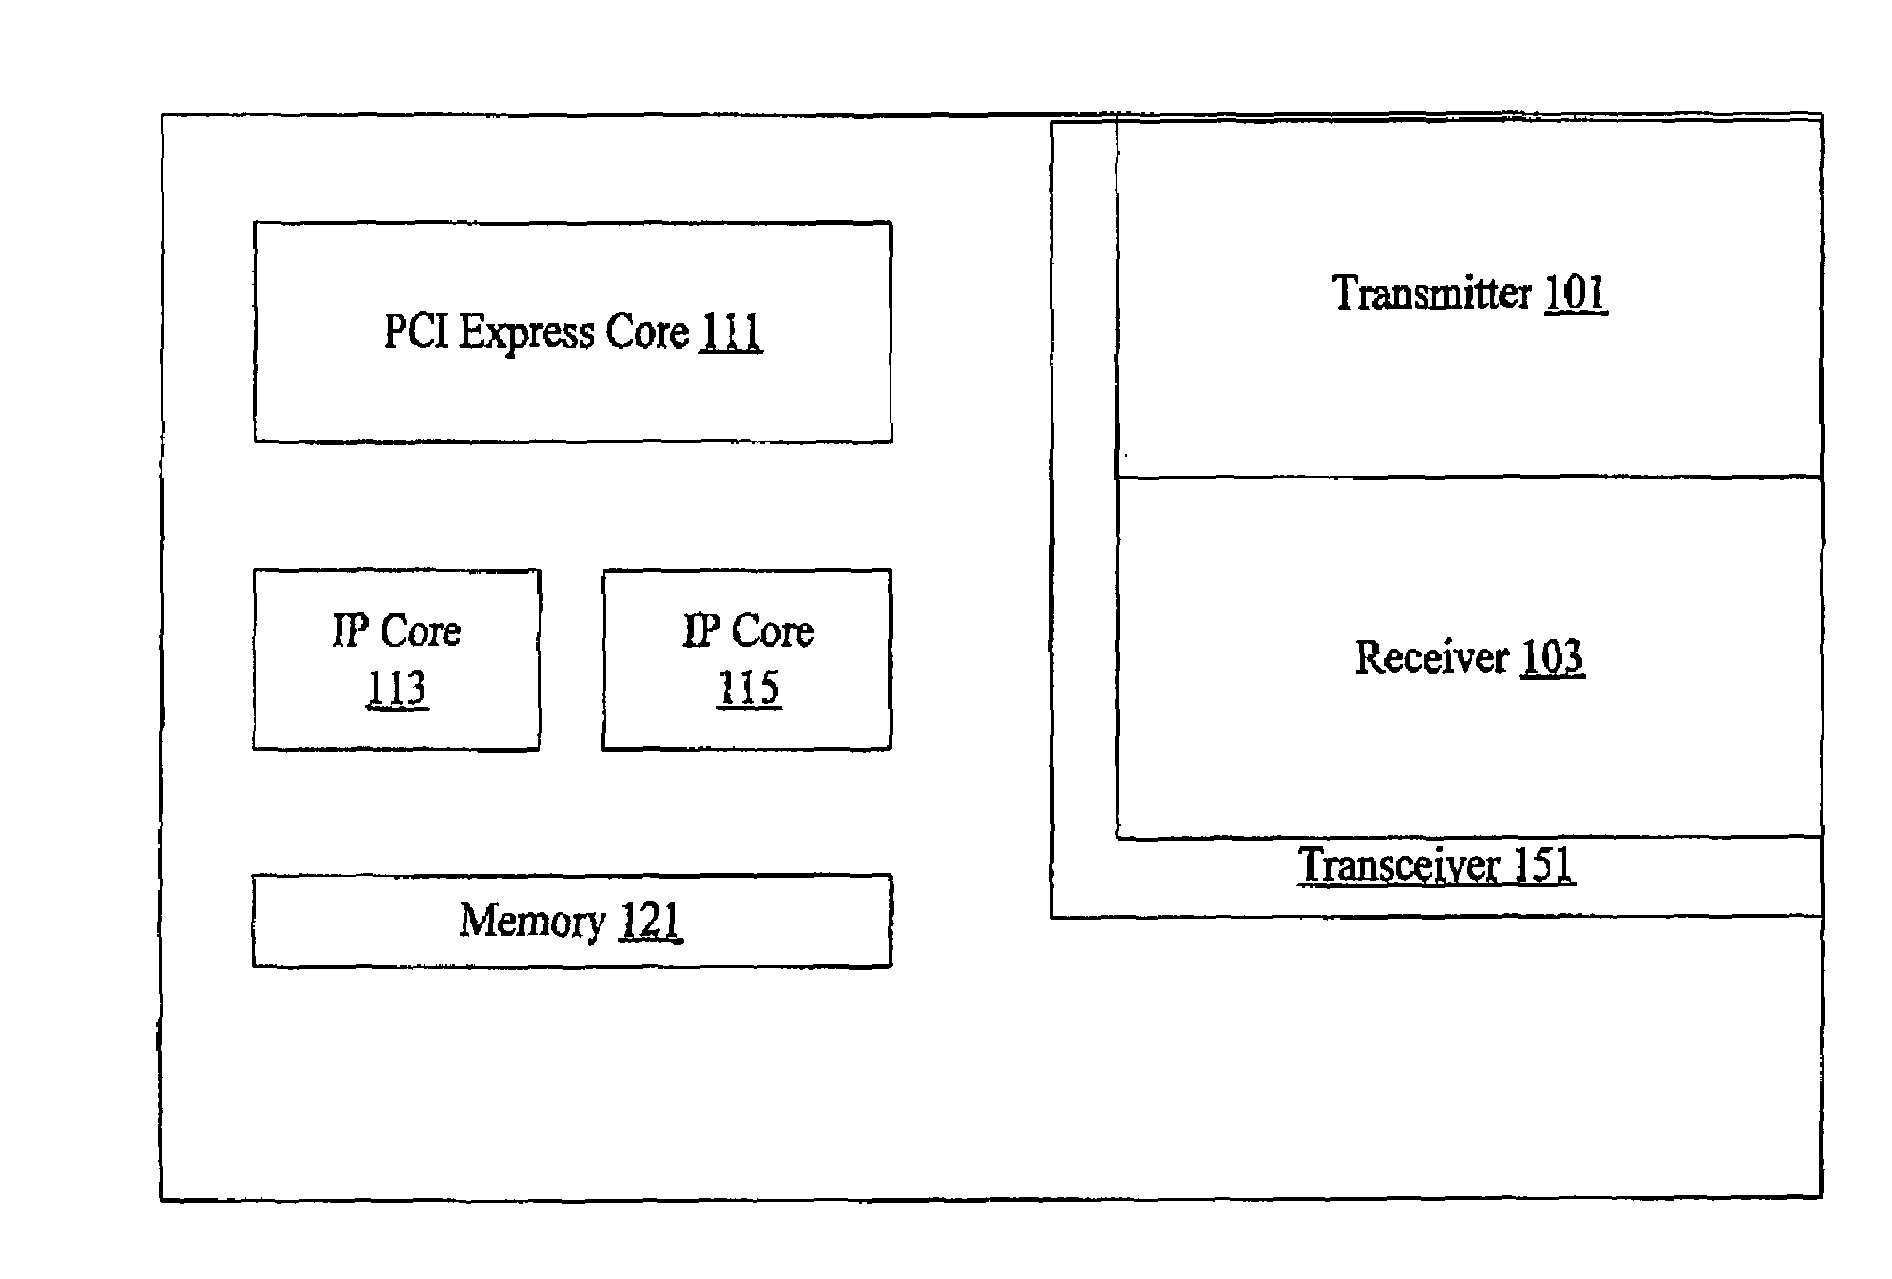 Implementation of PCI express